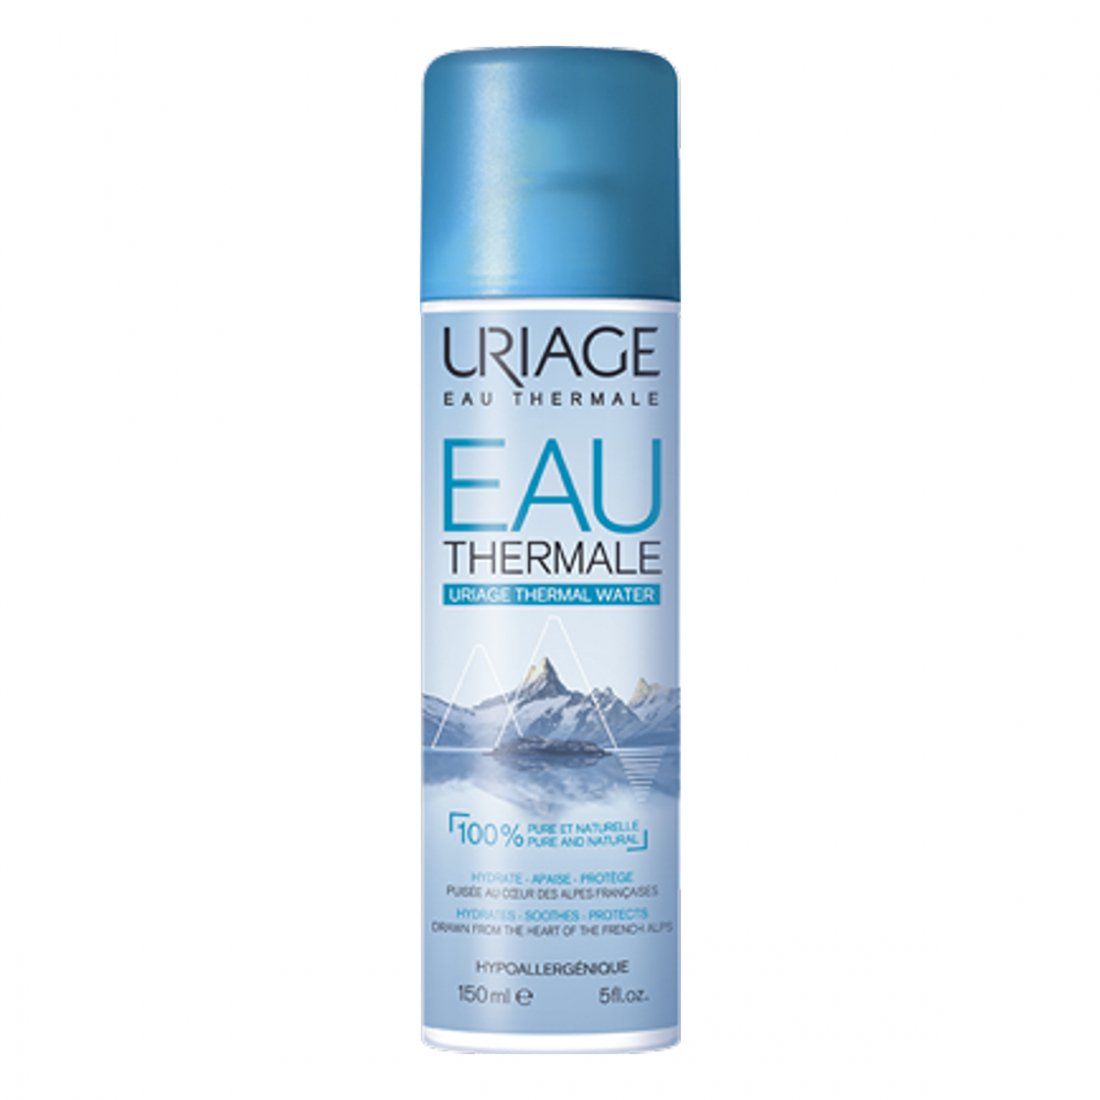 Uriage - Eau micellaire 'Thermale' - 150 ml